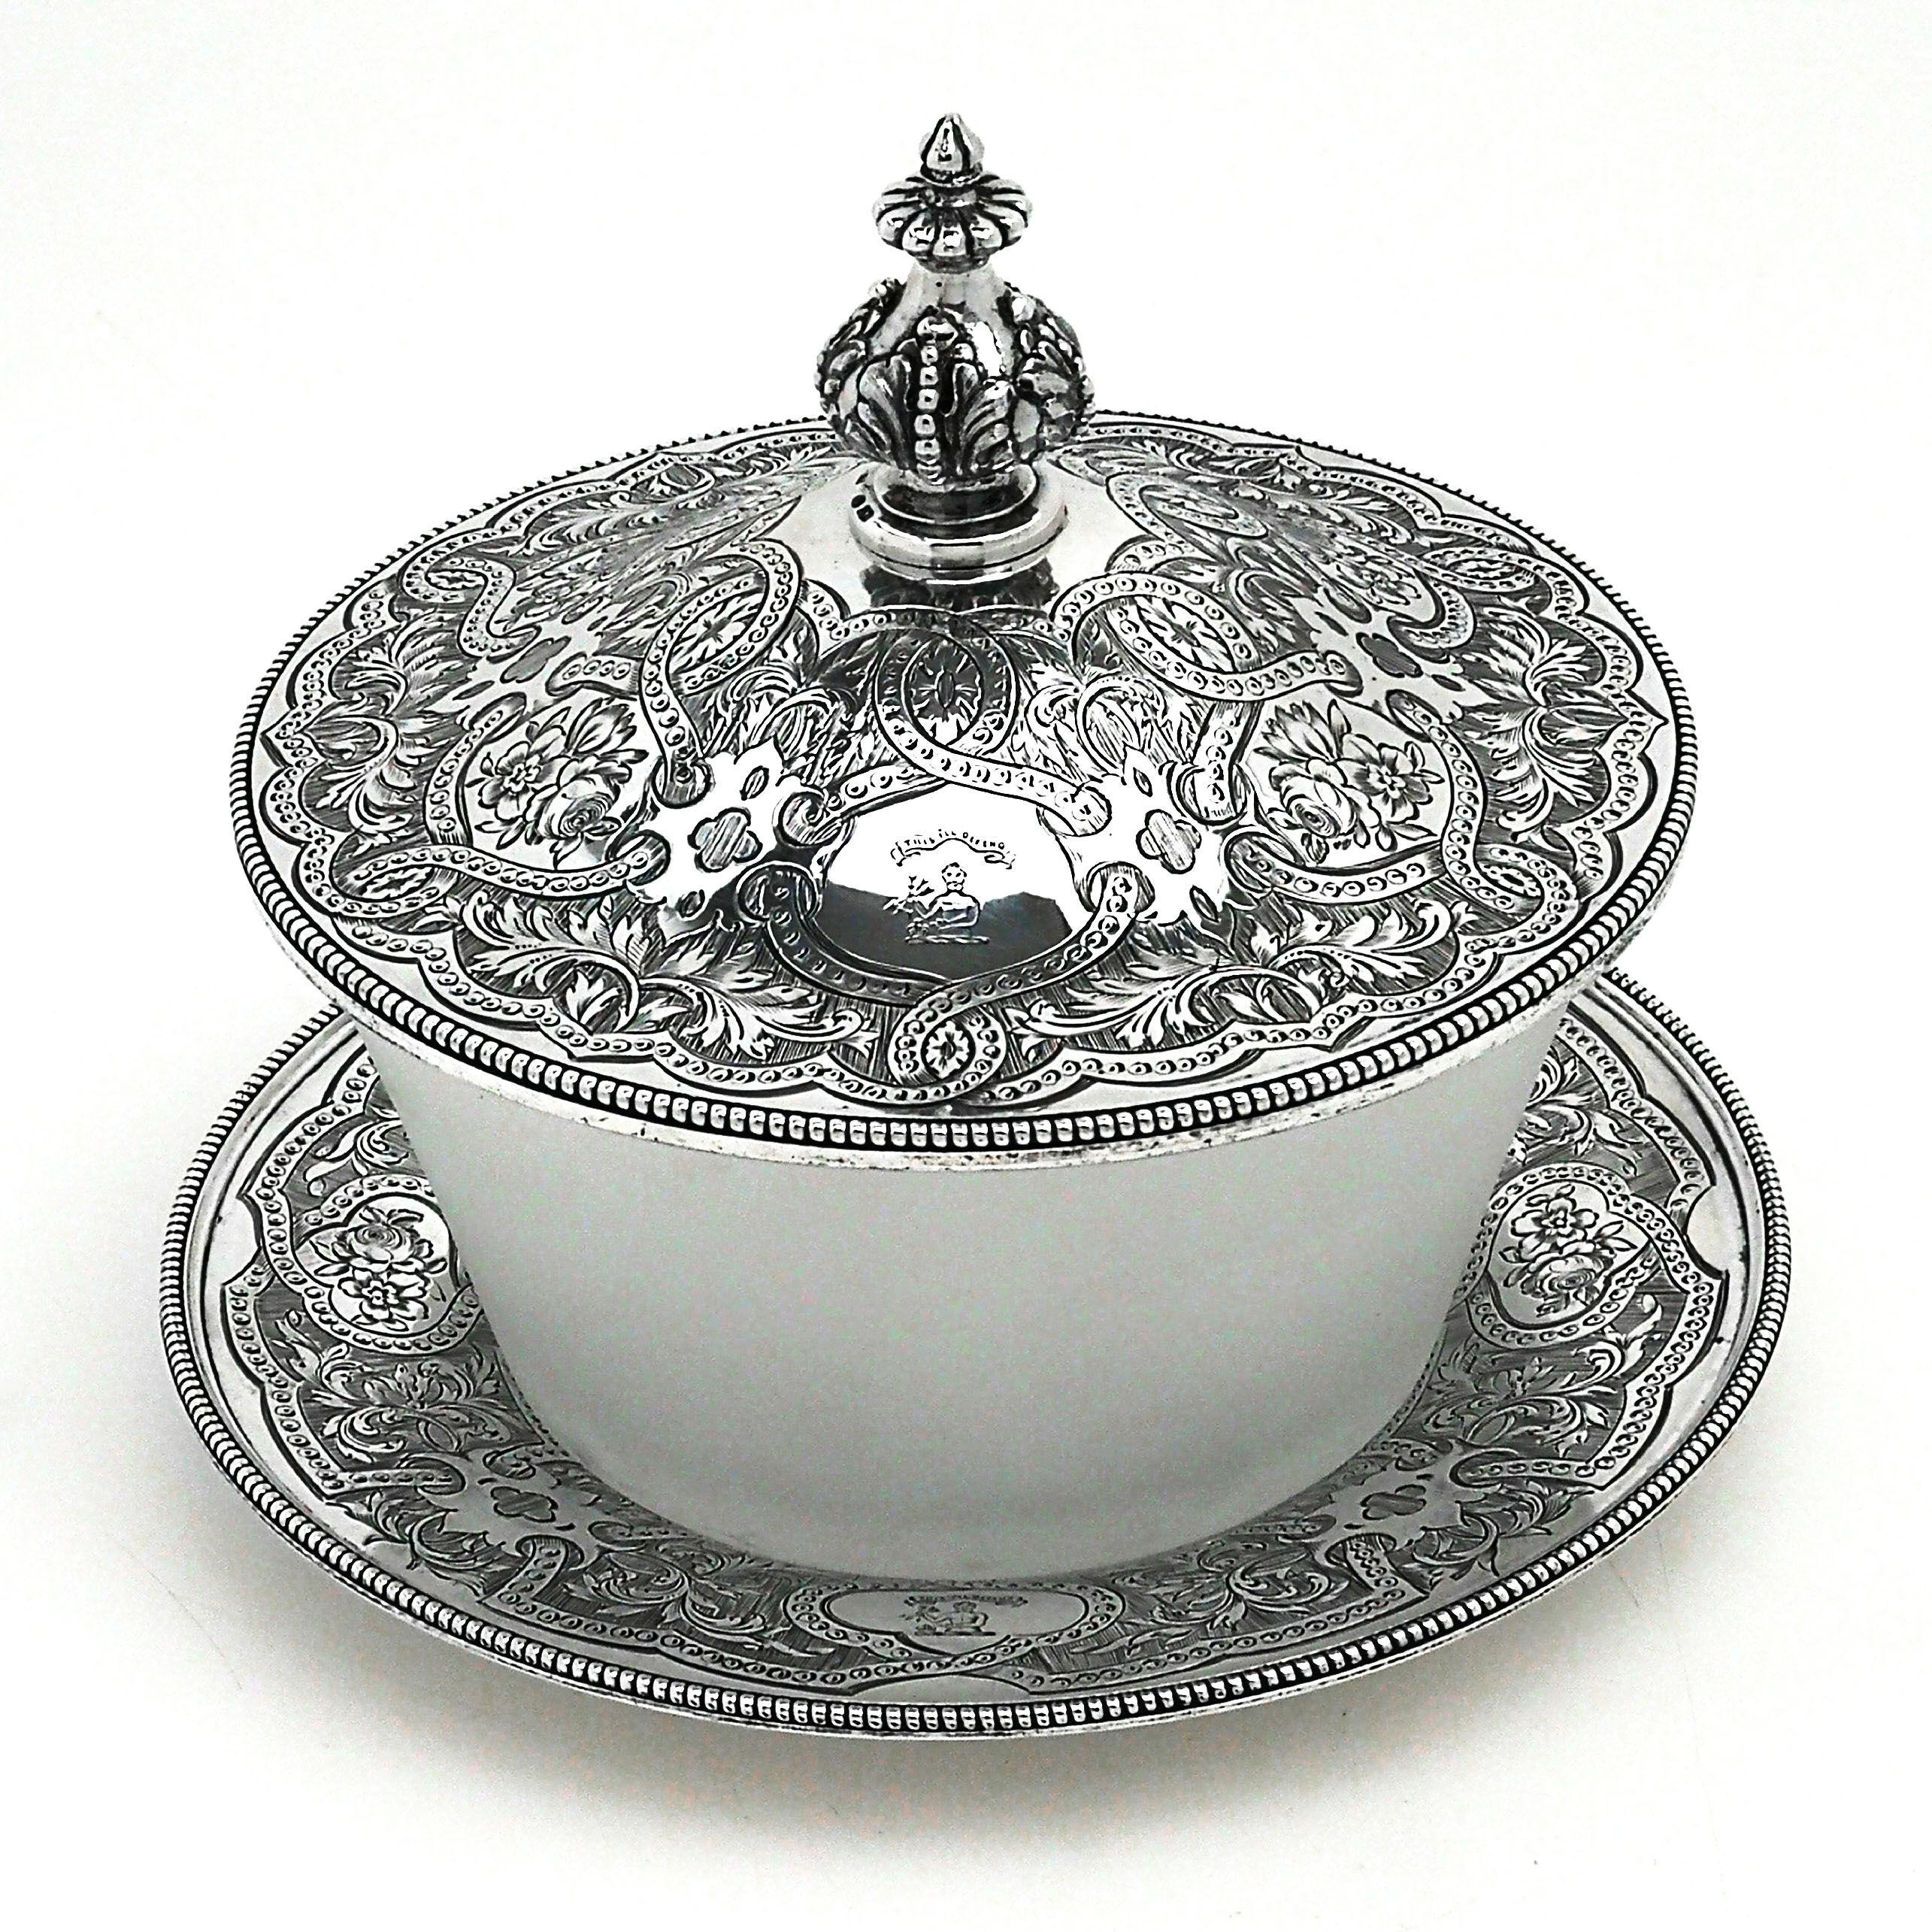 A gorgeous antique Victorian solid silver & glass butter dish. This butter dish has a frosted glass body standing on solid silver under plate and with a domed silver lid. Both the plate and the lid are embellished with gorgeous ornate engraving